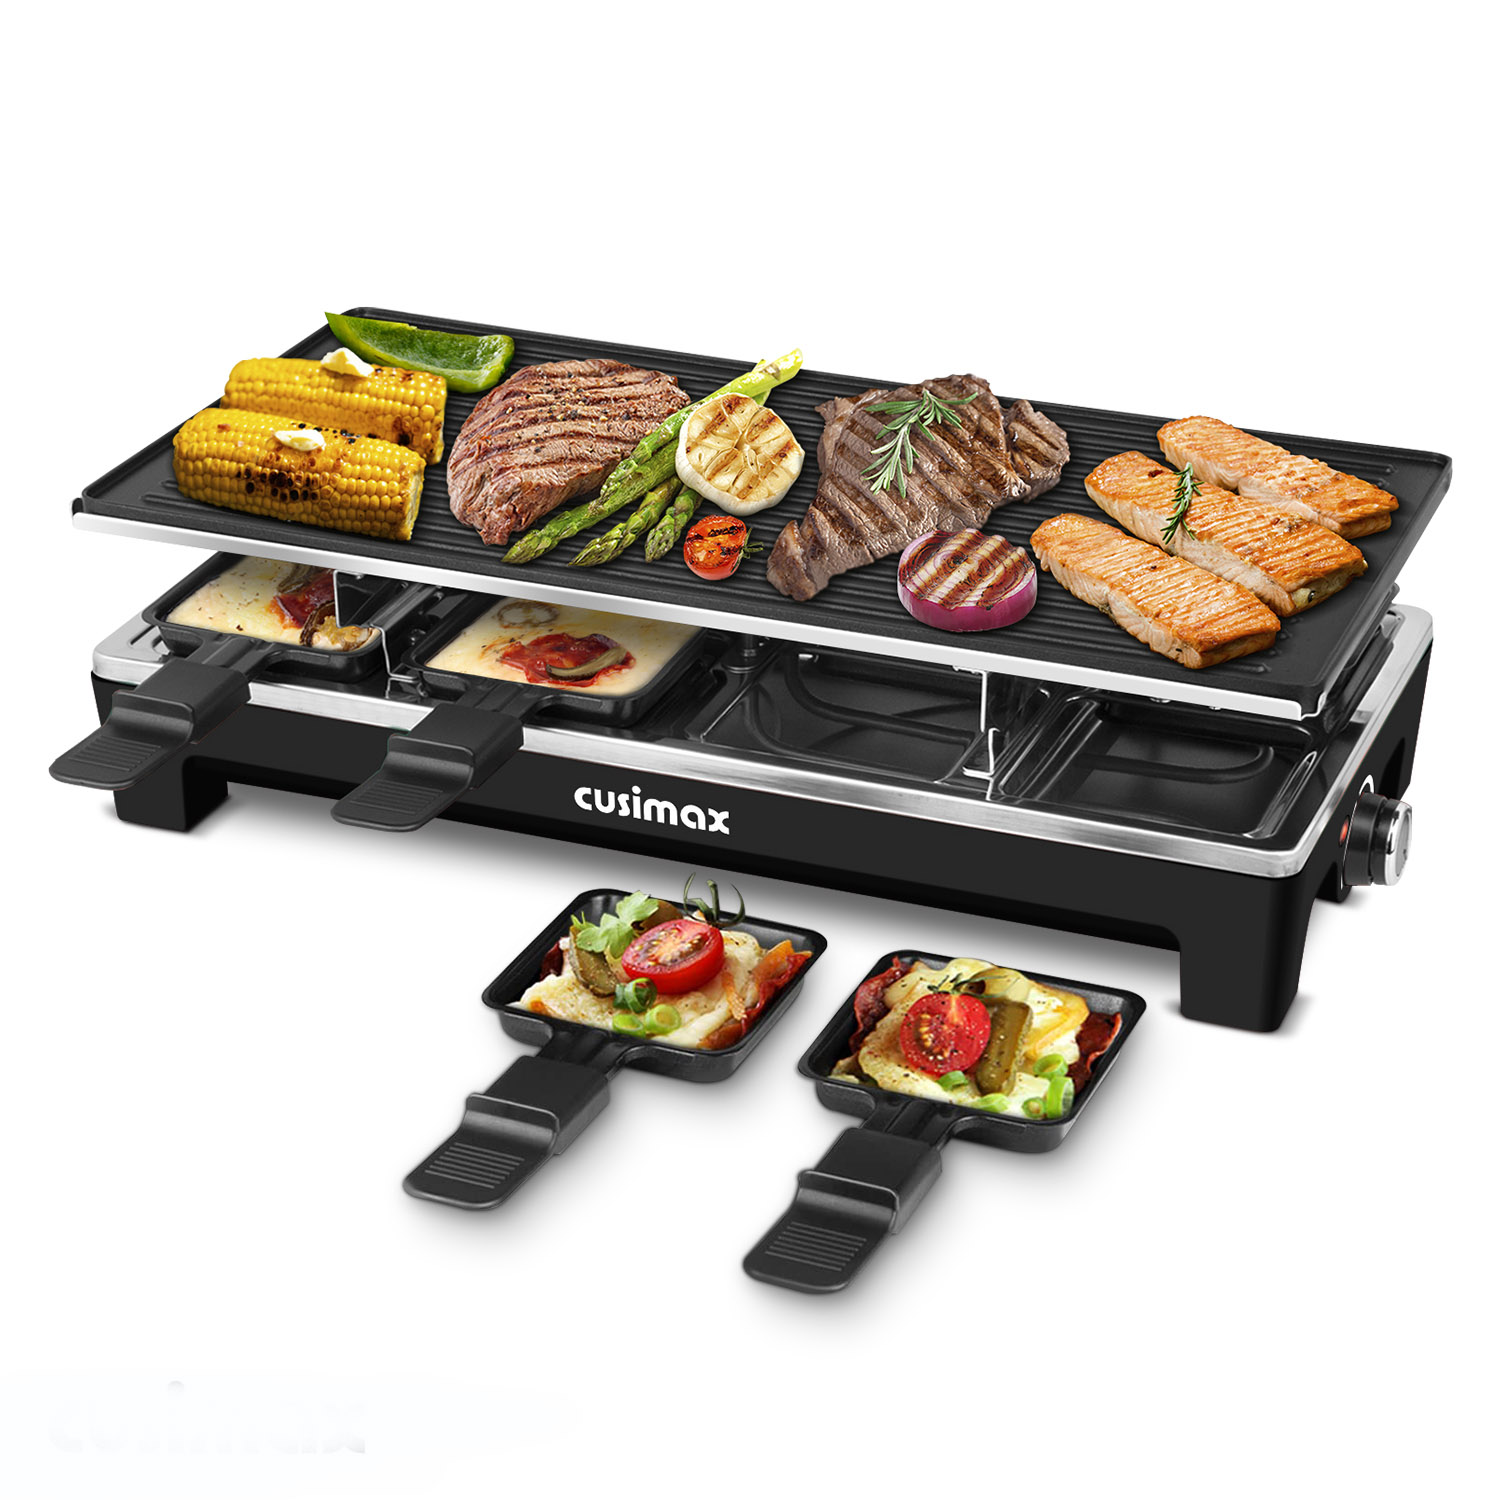 Techwood Electric Raclette Grill Raclette Cheese with Thermostat